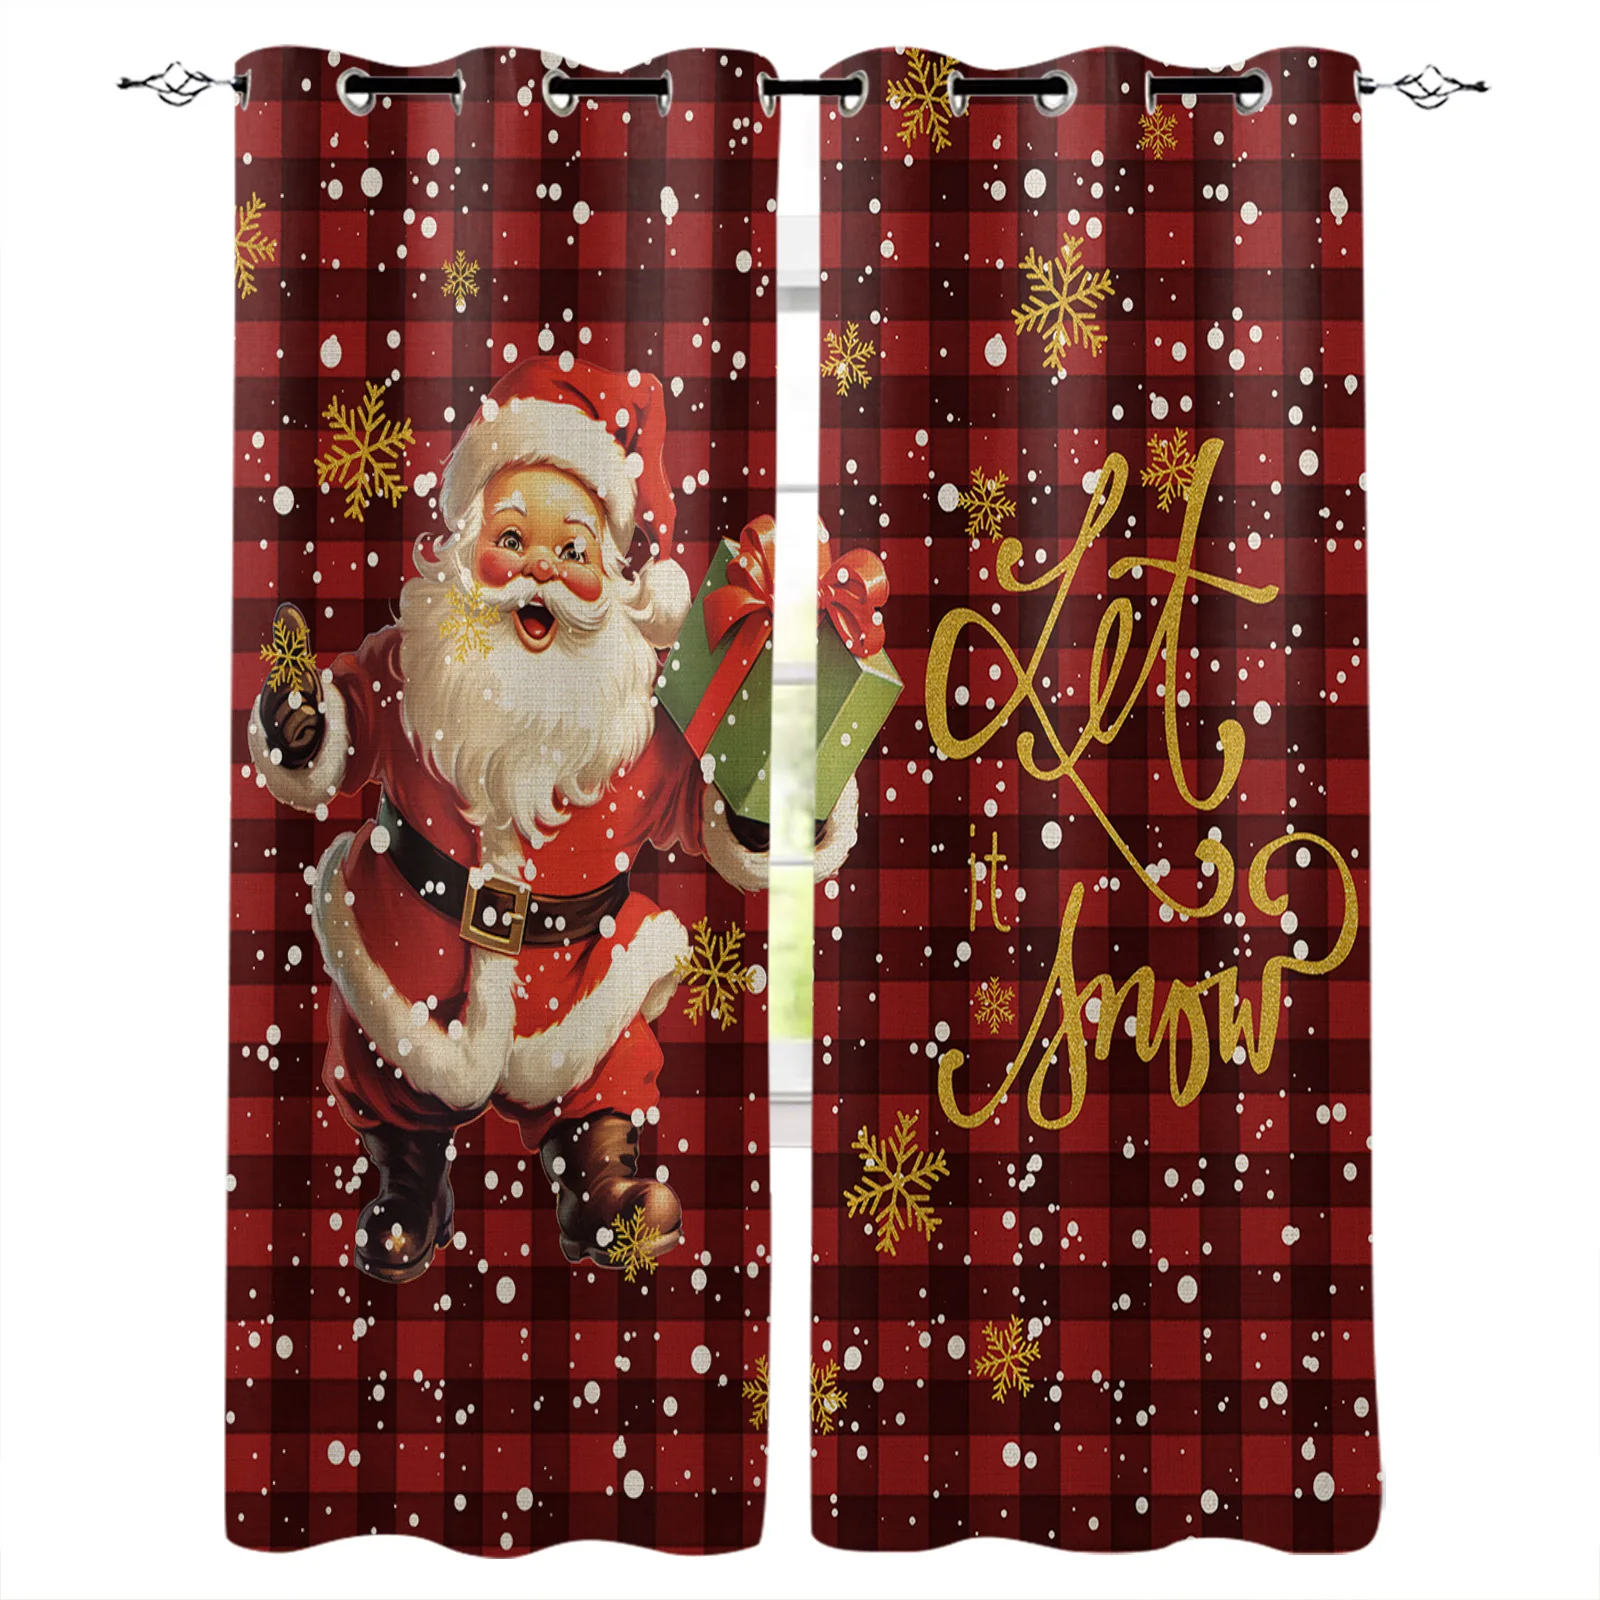 

Christmas Snowflake Santa Claus Window Curtains for Living Room Luxury Bedroom Decor Curtains Kitchen Balcony Drapes